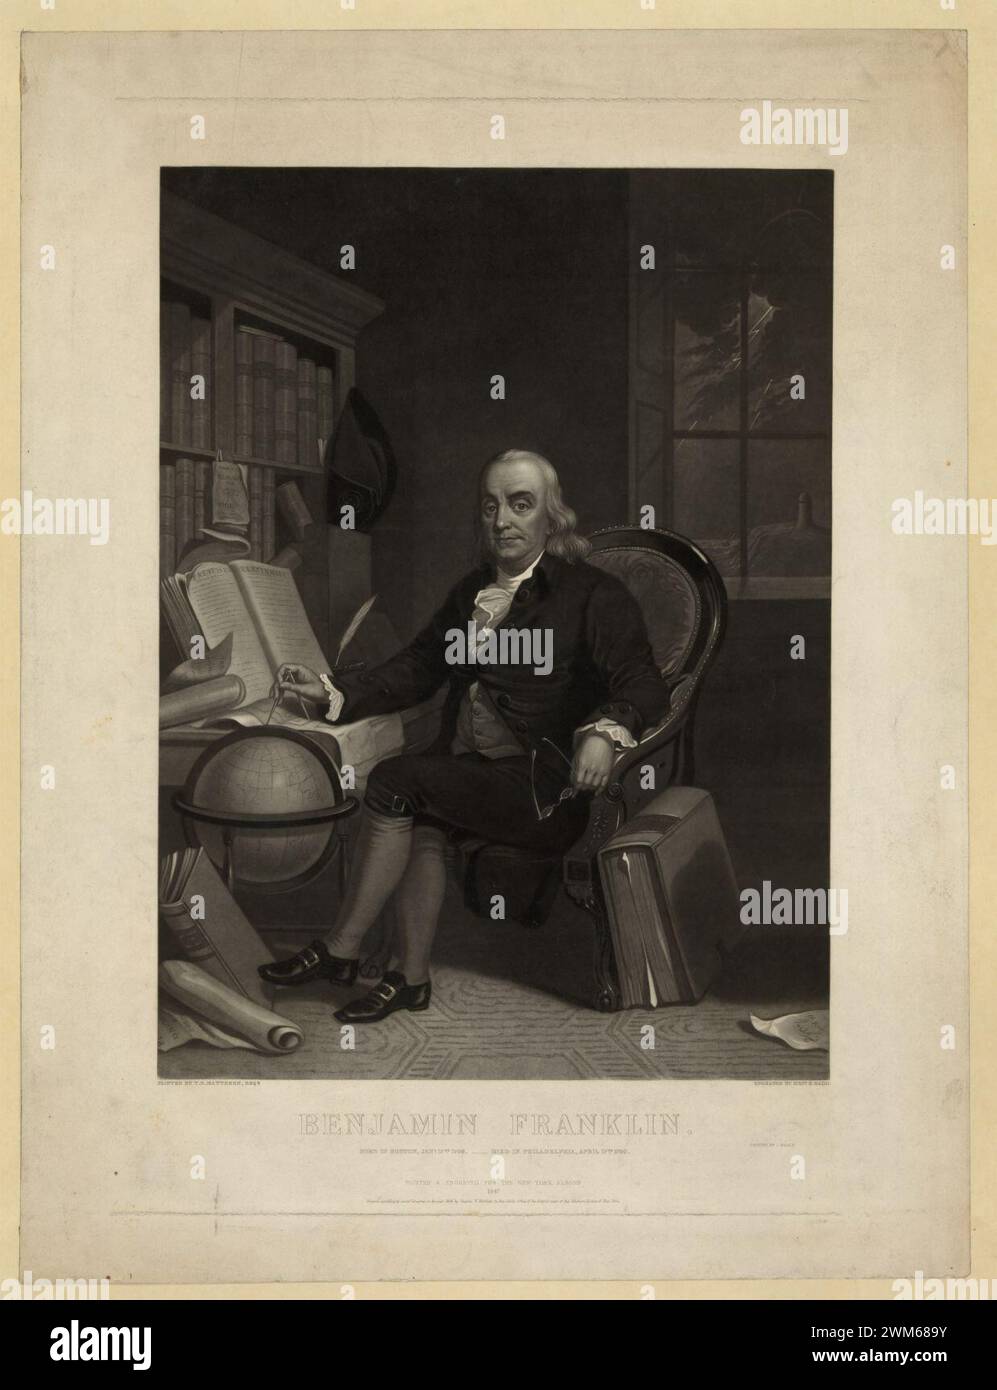 Benjamin Franklin - born in Boston, Jany. 17th 1706 - died in Philadelphia, April 17th 1790 - painted by T.H. Matteson, Esqr. ; engraved by Heny. S. Sadd. Stock Photo